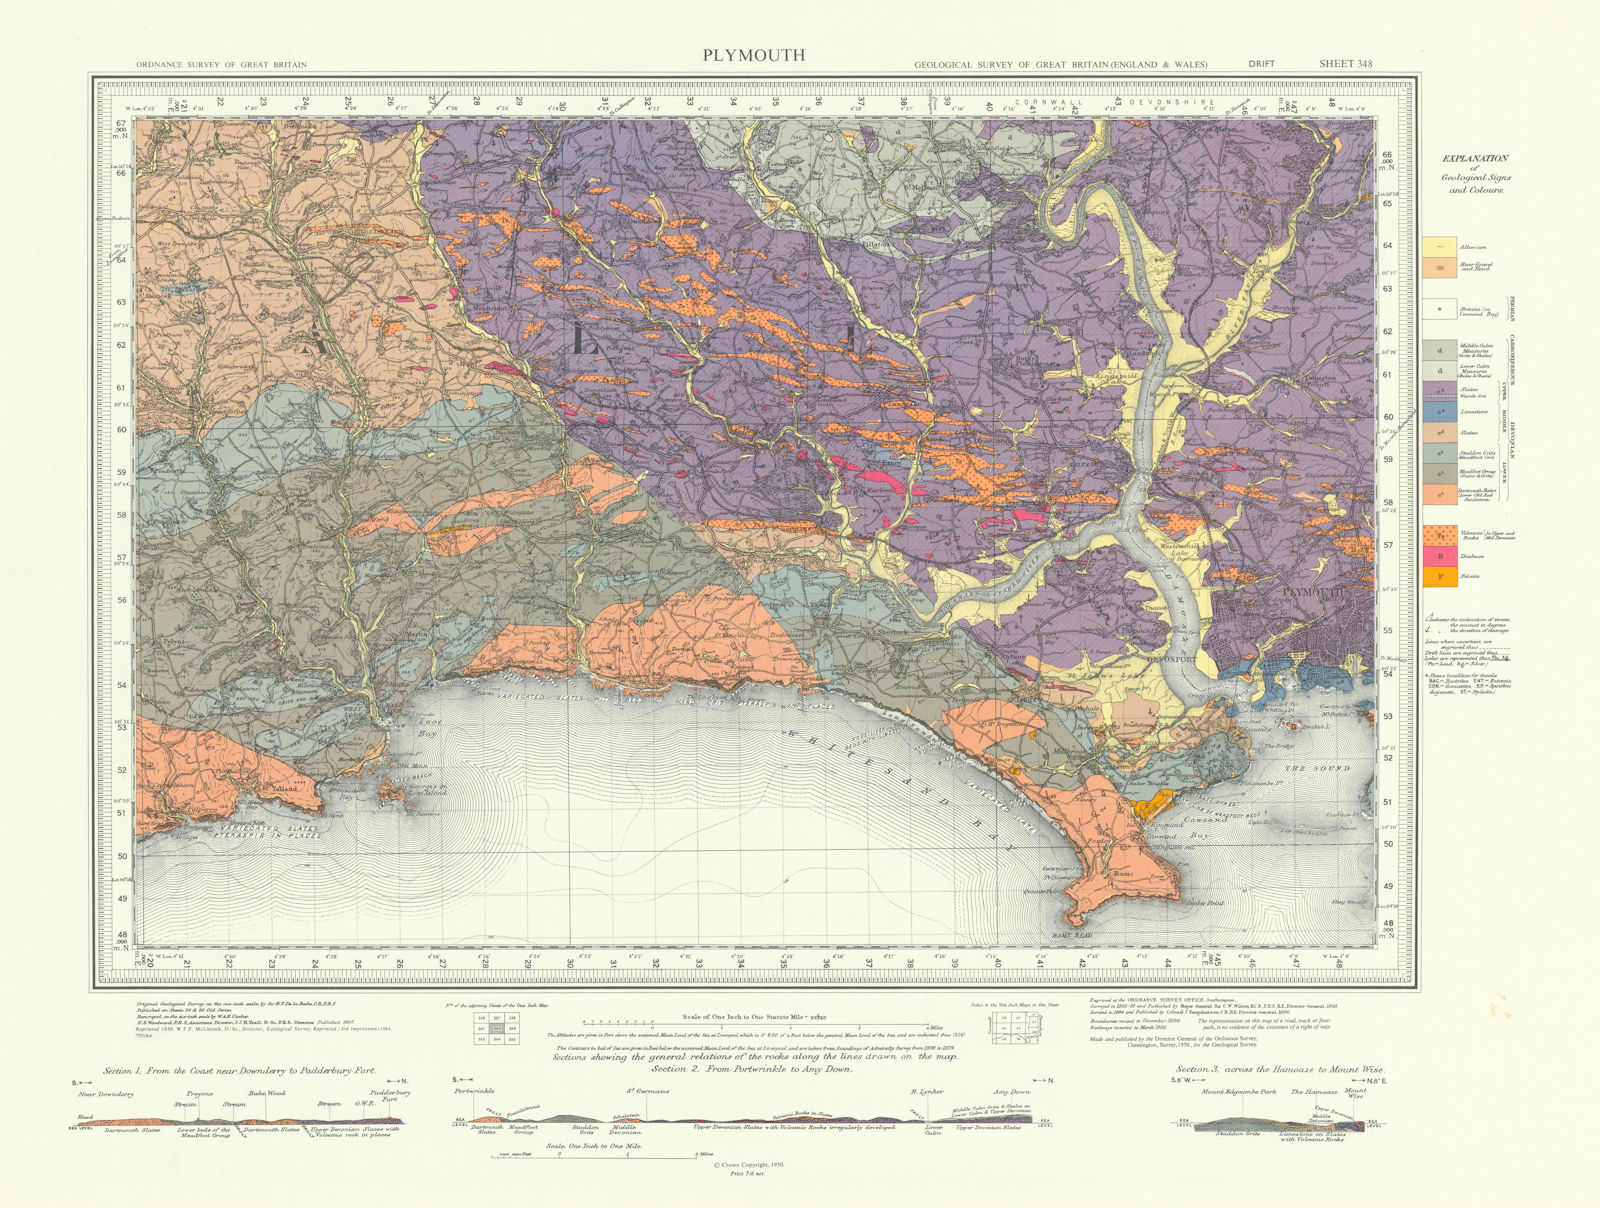 Associate Product Plymouth geological survey sheet 348 Tamar Valley Cornwall Coast Looe 1964 map